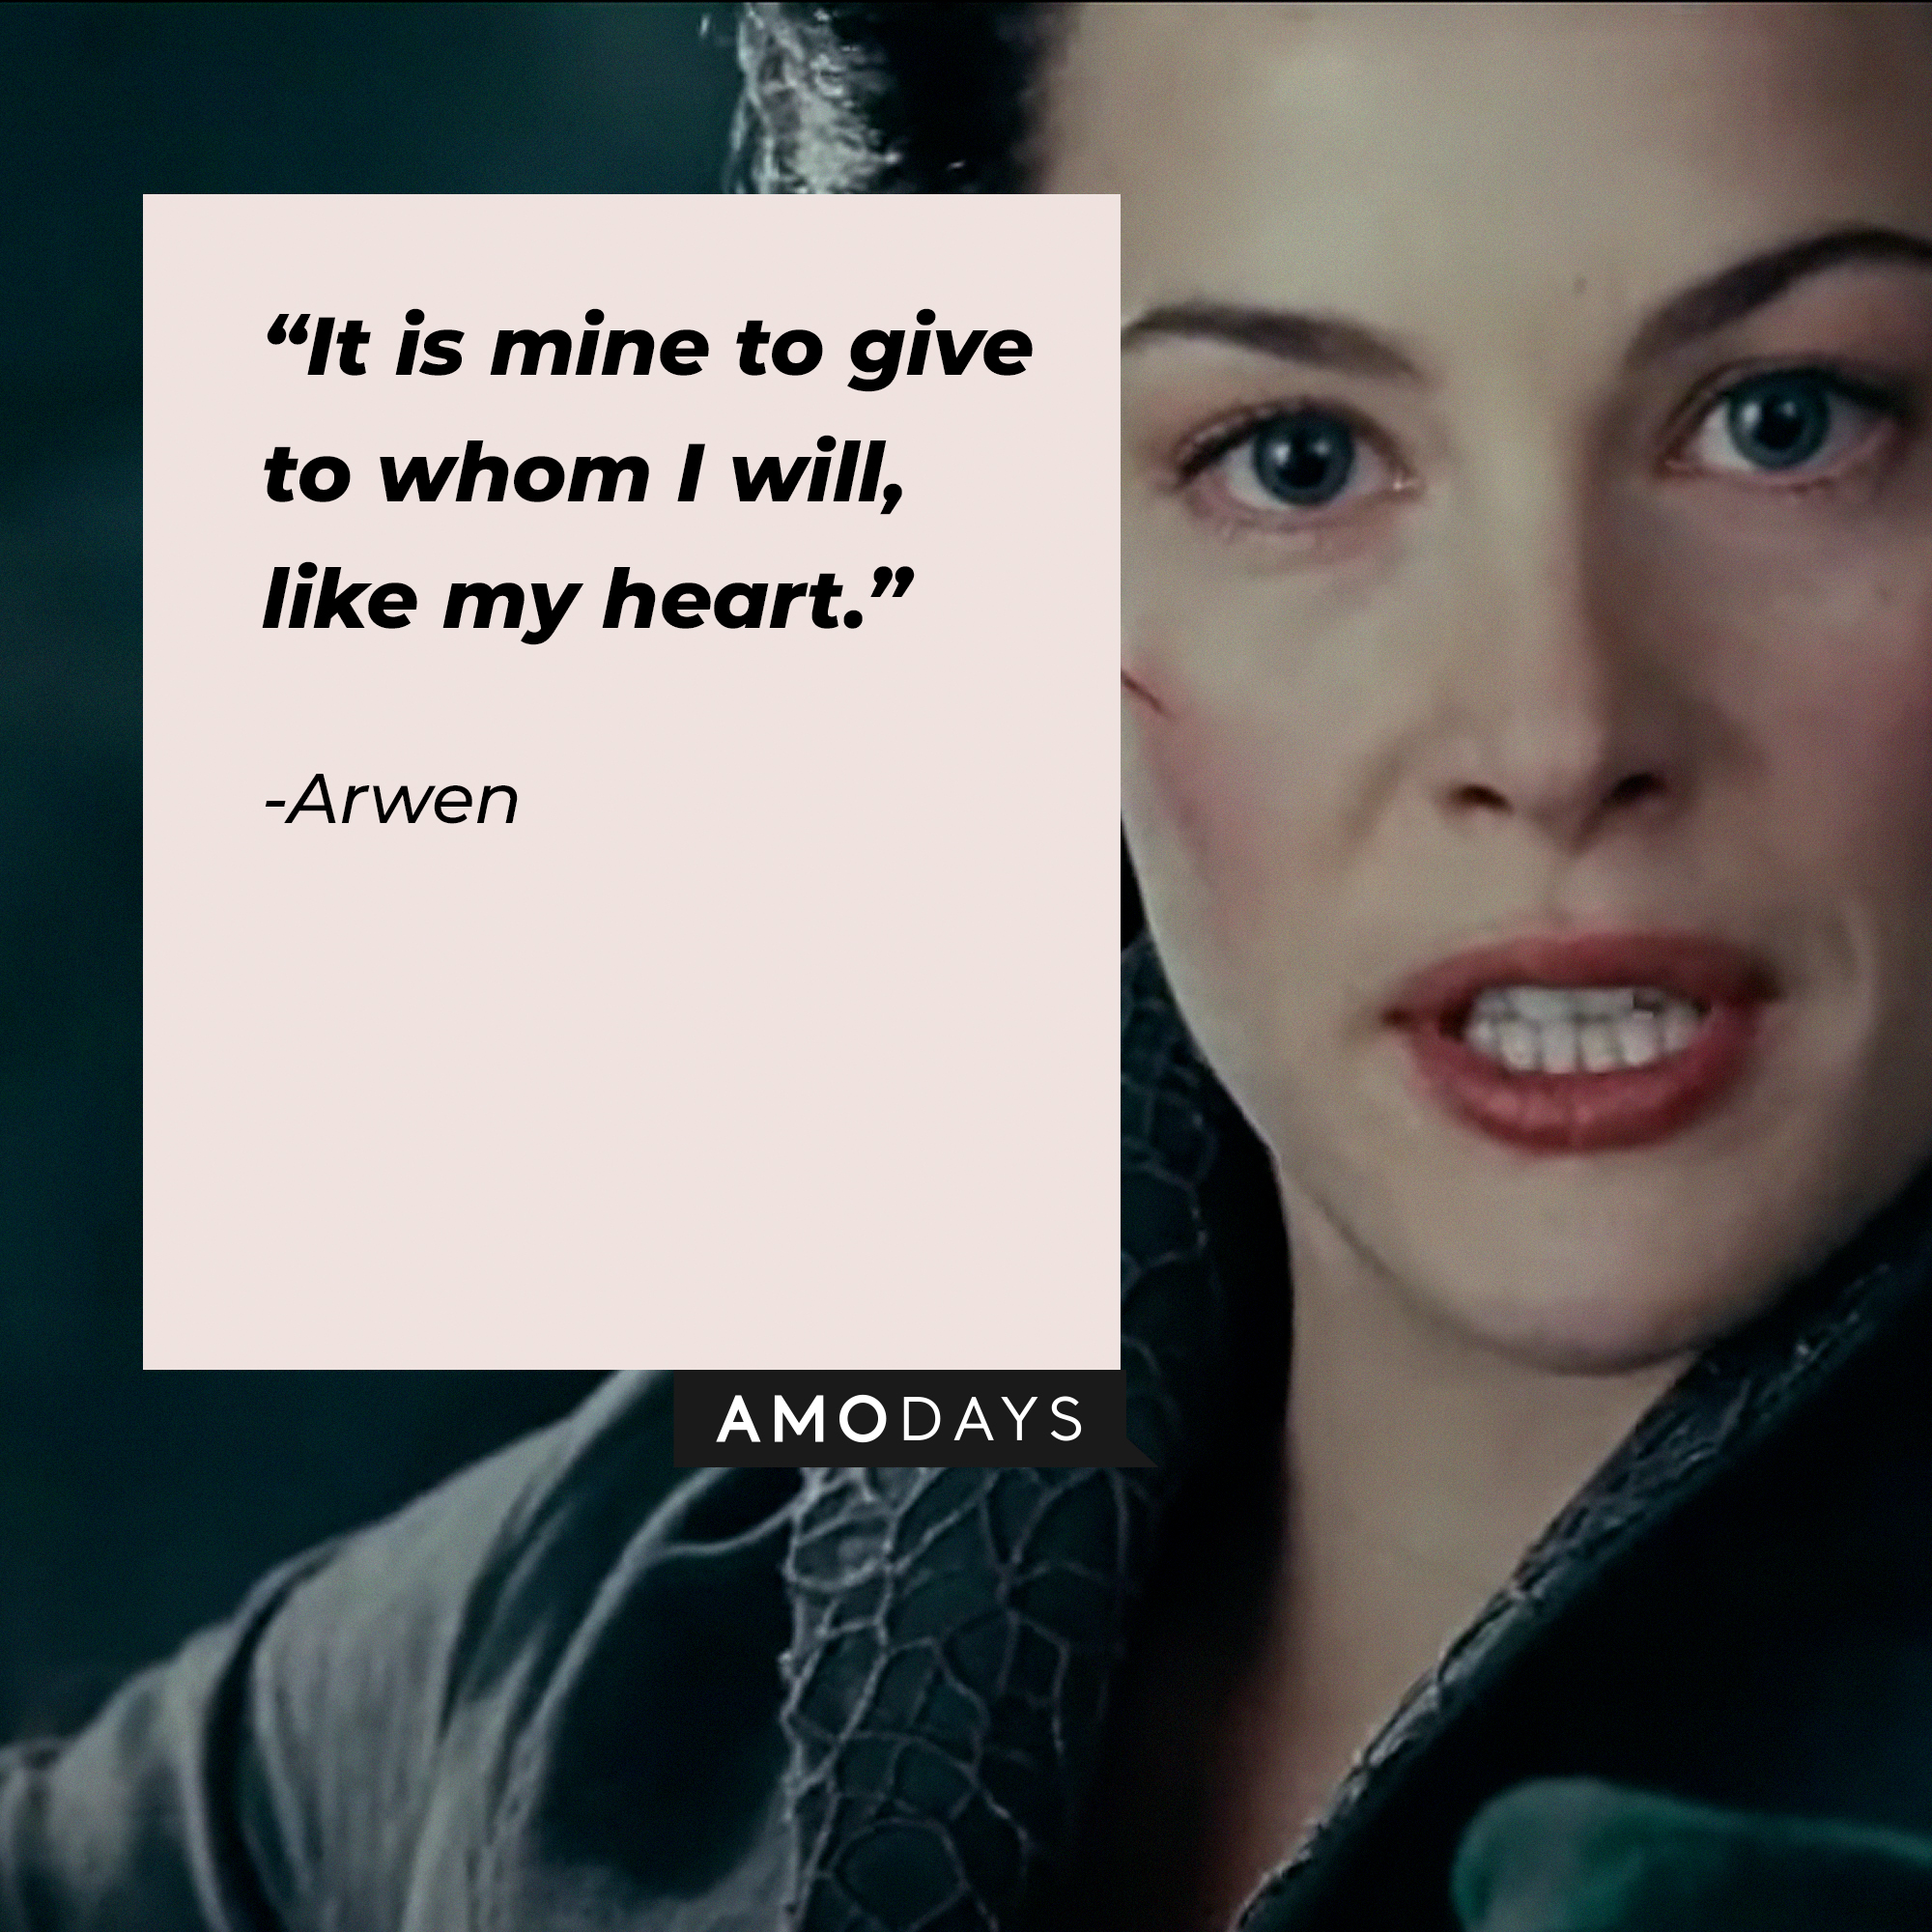 Arwen's quote : “It is mine to give to whom I will, like my heart.” | Source: facebook.com/lordoftheringstrilogy